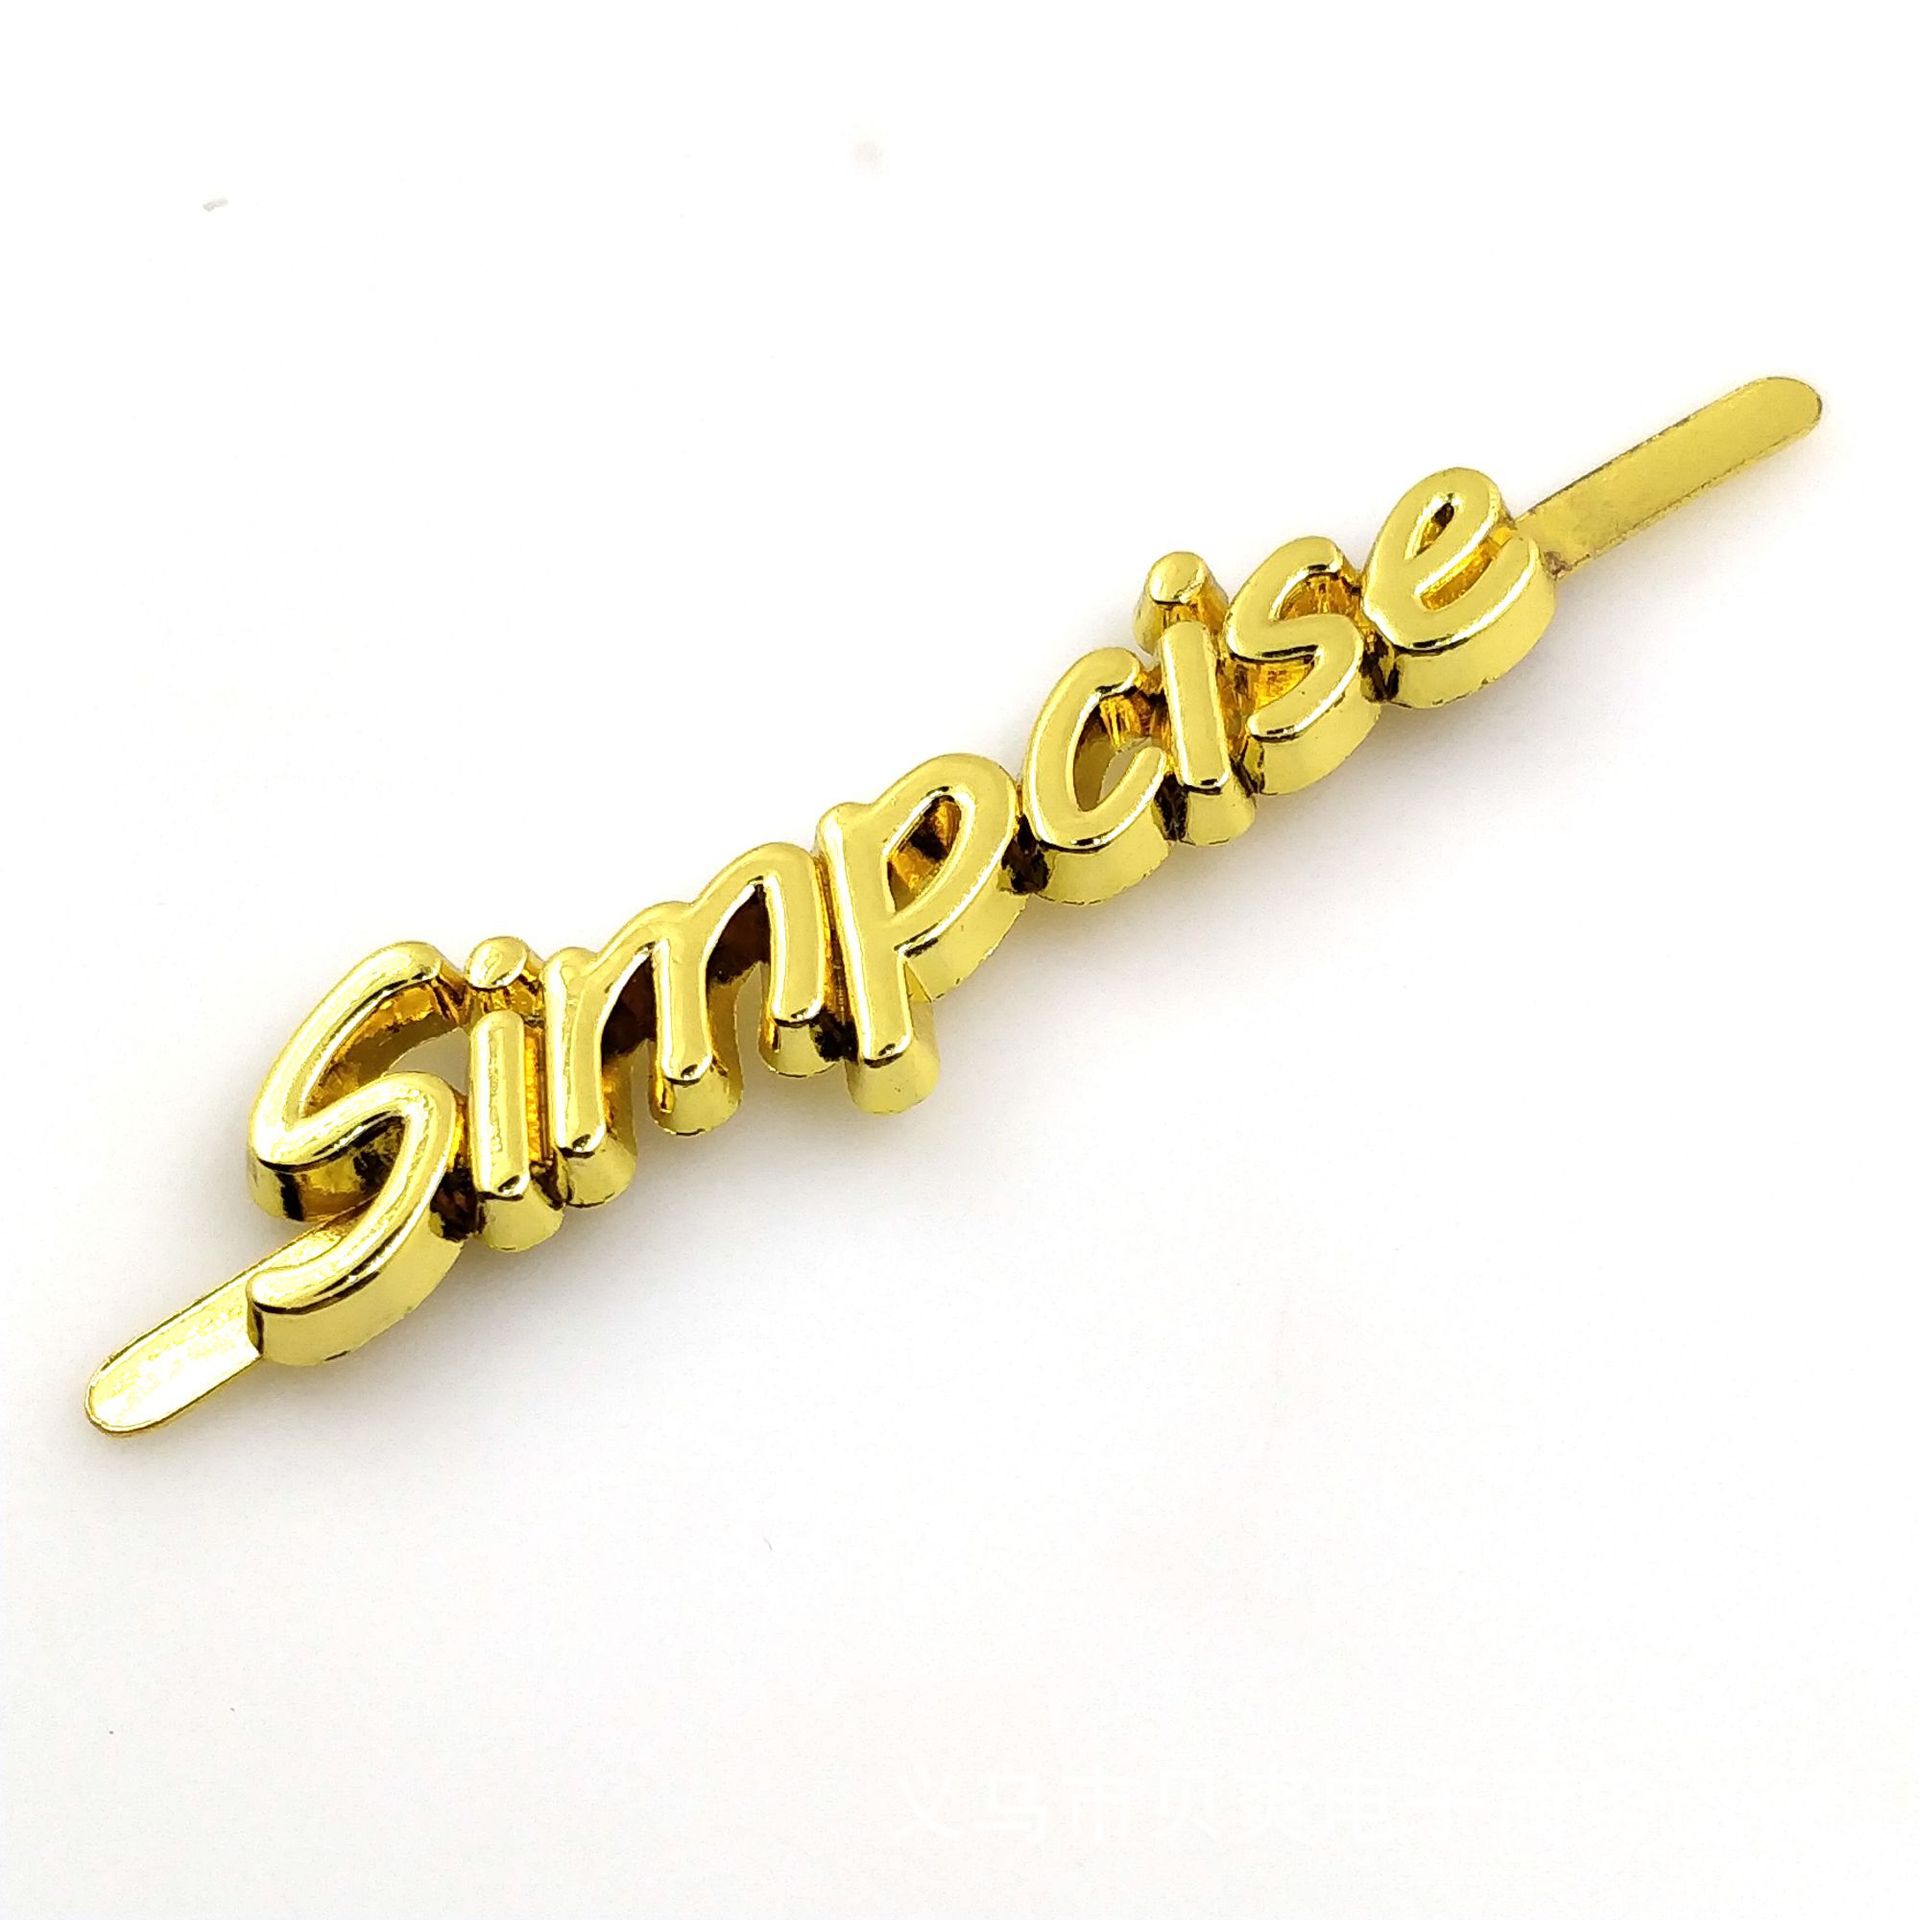 Zinc Alloy Die-Casting Letter Hollow Light Plate Lettering Stitching Pin Metal Tag Clothing Luggage Accessories Punching Hand Sewing